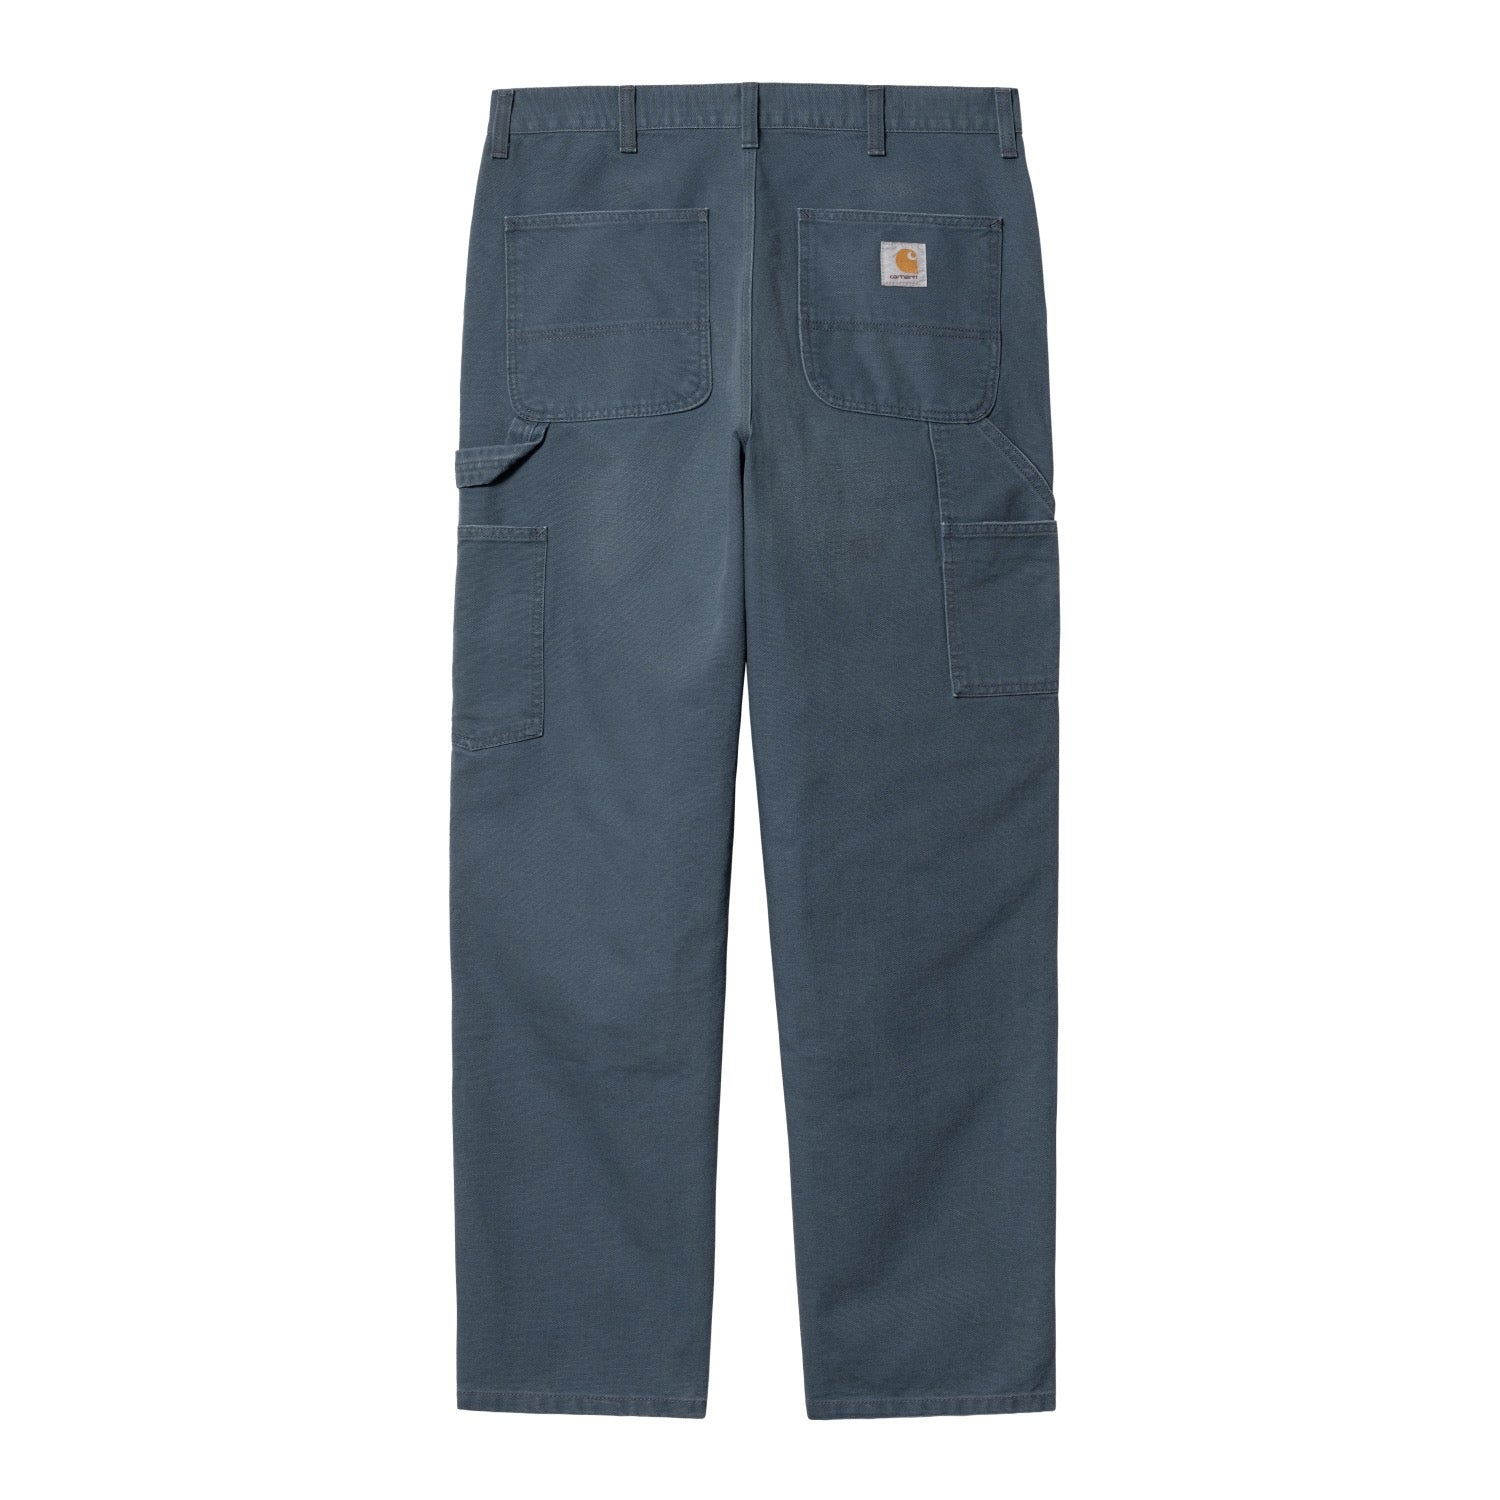 【Carhartt Wip/カーハートダブルアイピー】DOUBLE KNEE PANT - OR3K Ore (aged canvas)  28インチ【送料無料 北海道/沖縄/離島含む】